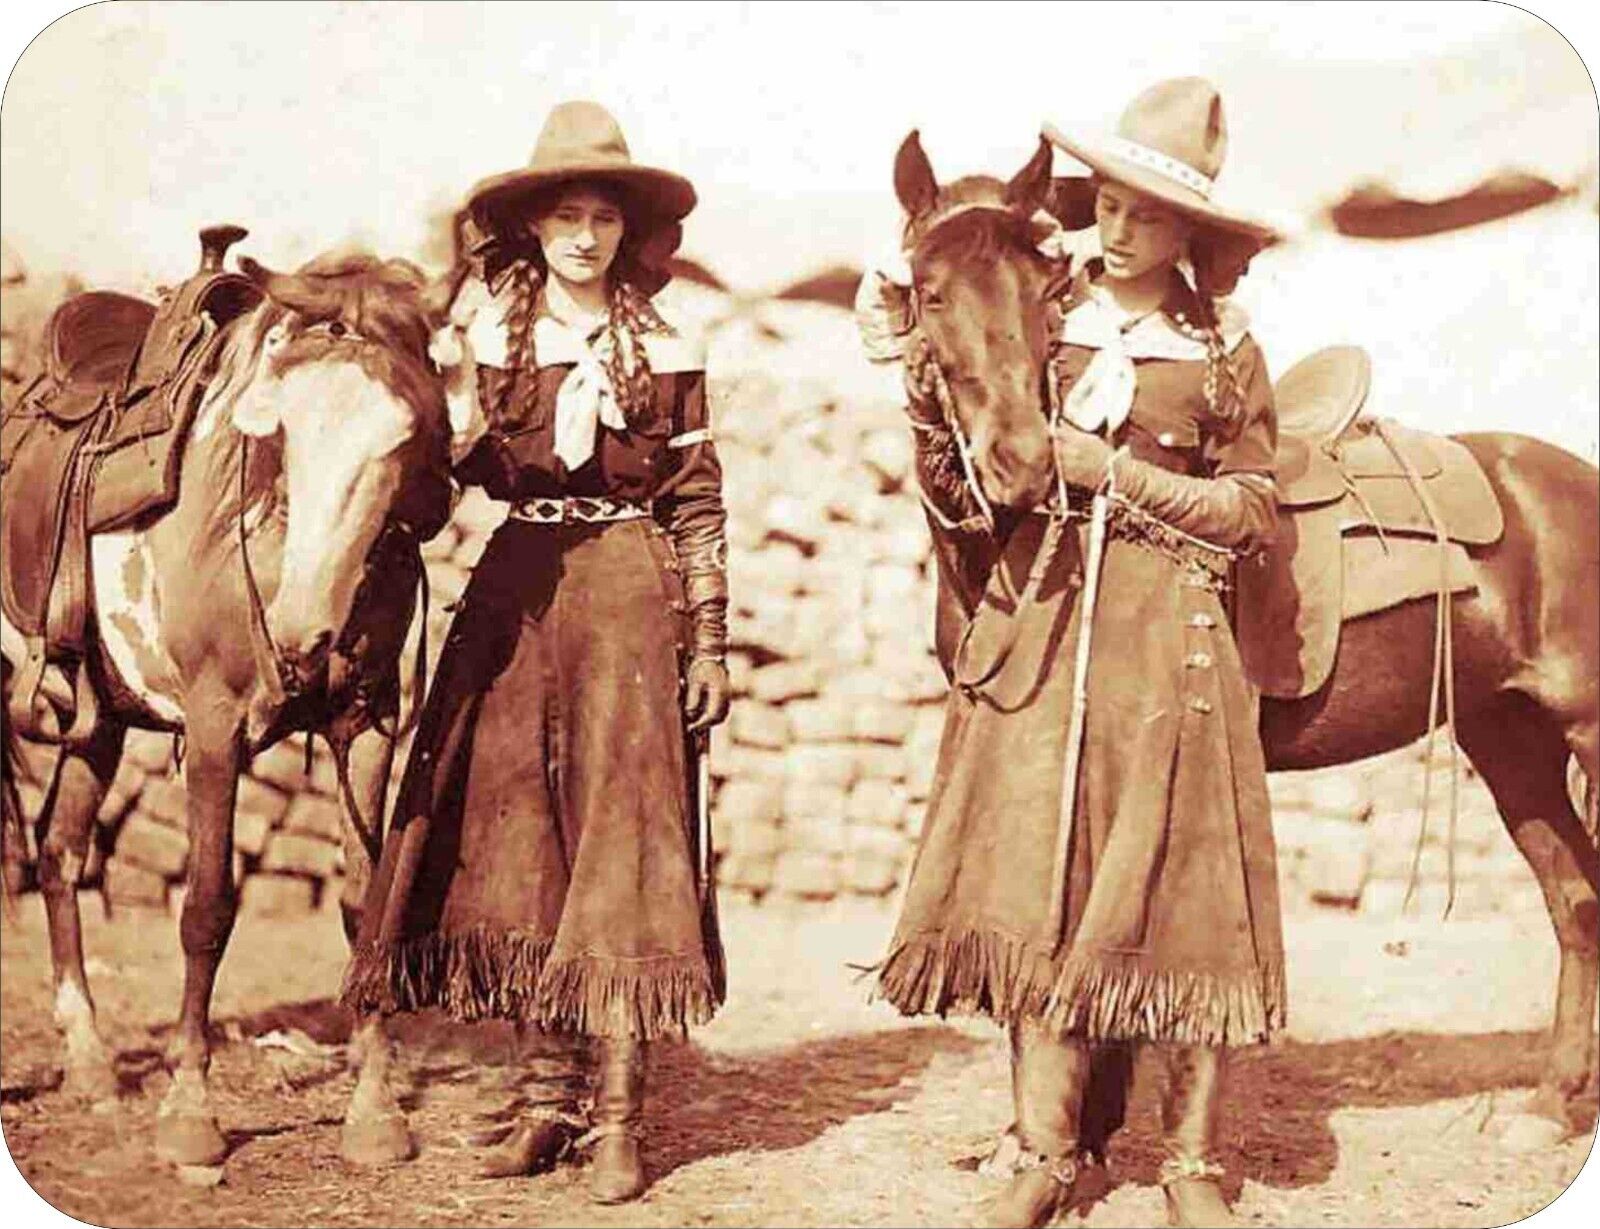 2 Rodeo Cowgirls Photo Art Standard Mouse Pad Vintage 1930s